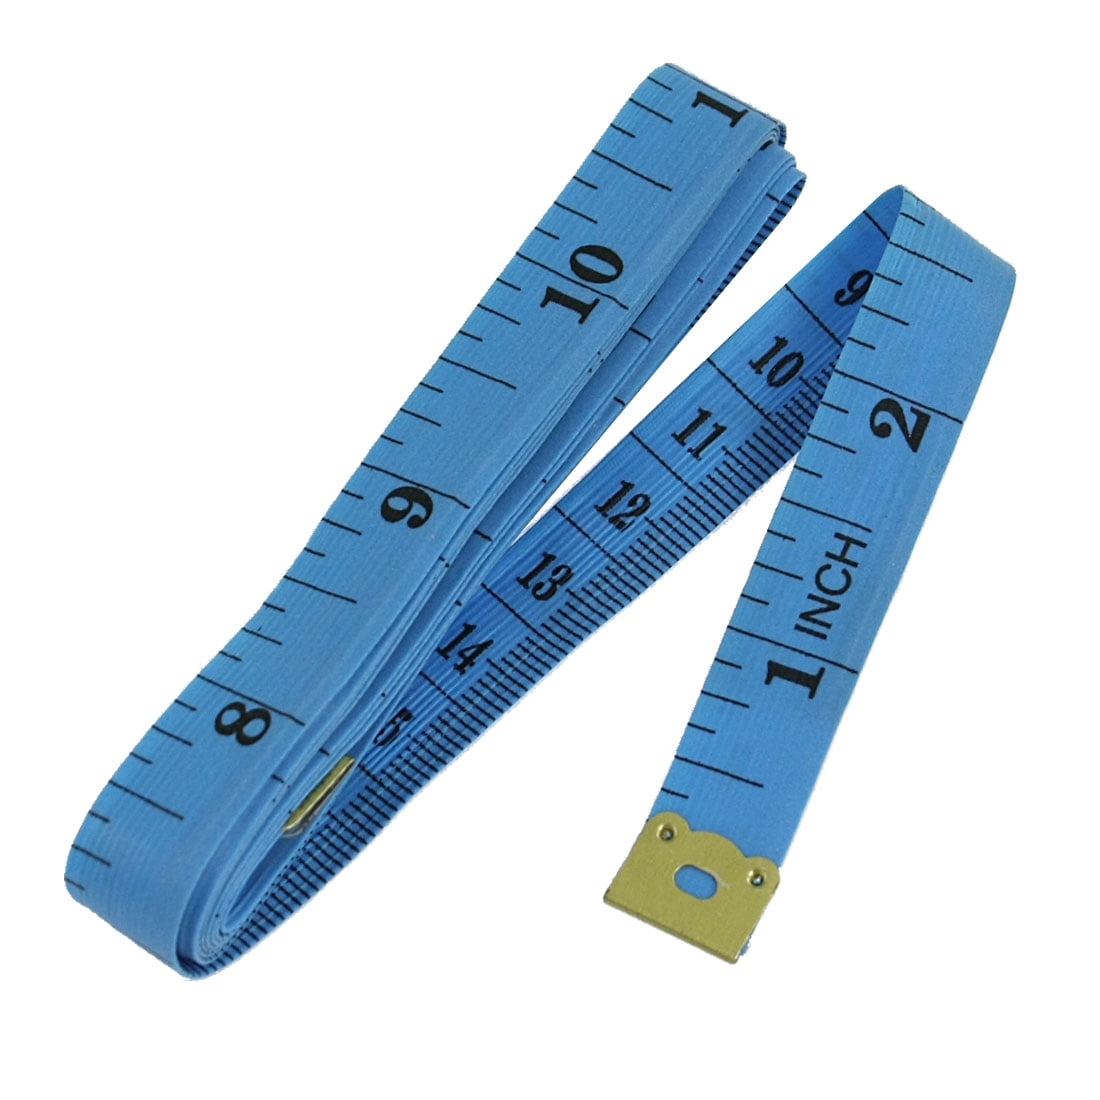 Retractable Body Measuring Ruler Sewing Cloth Tailor Tape Measure TaDD 